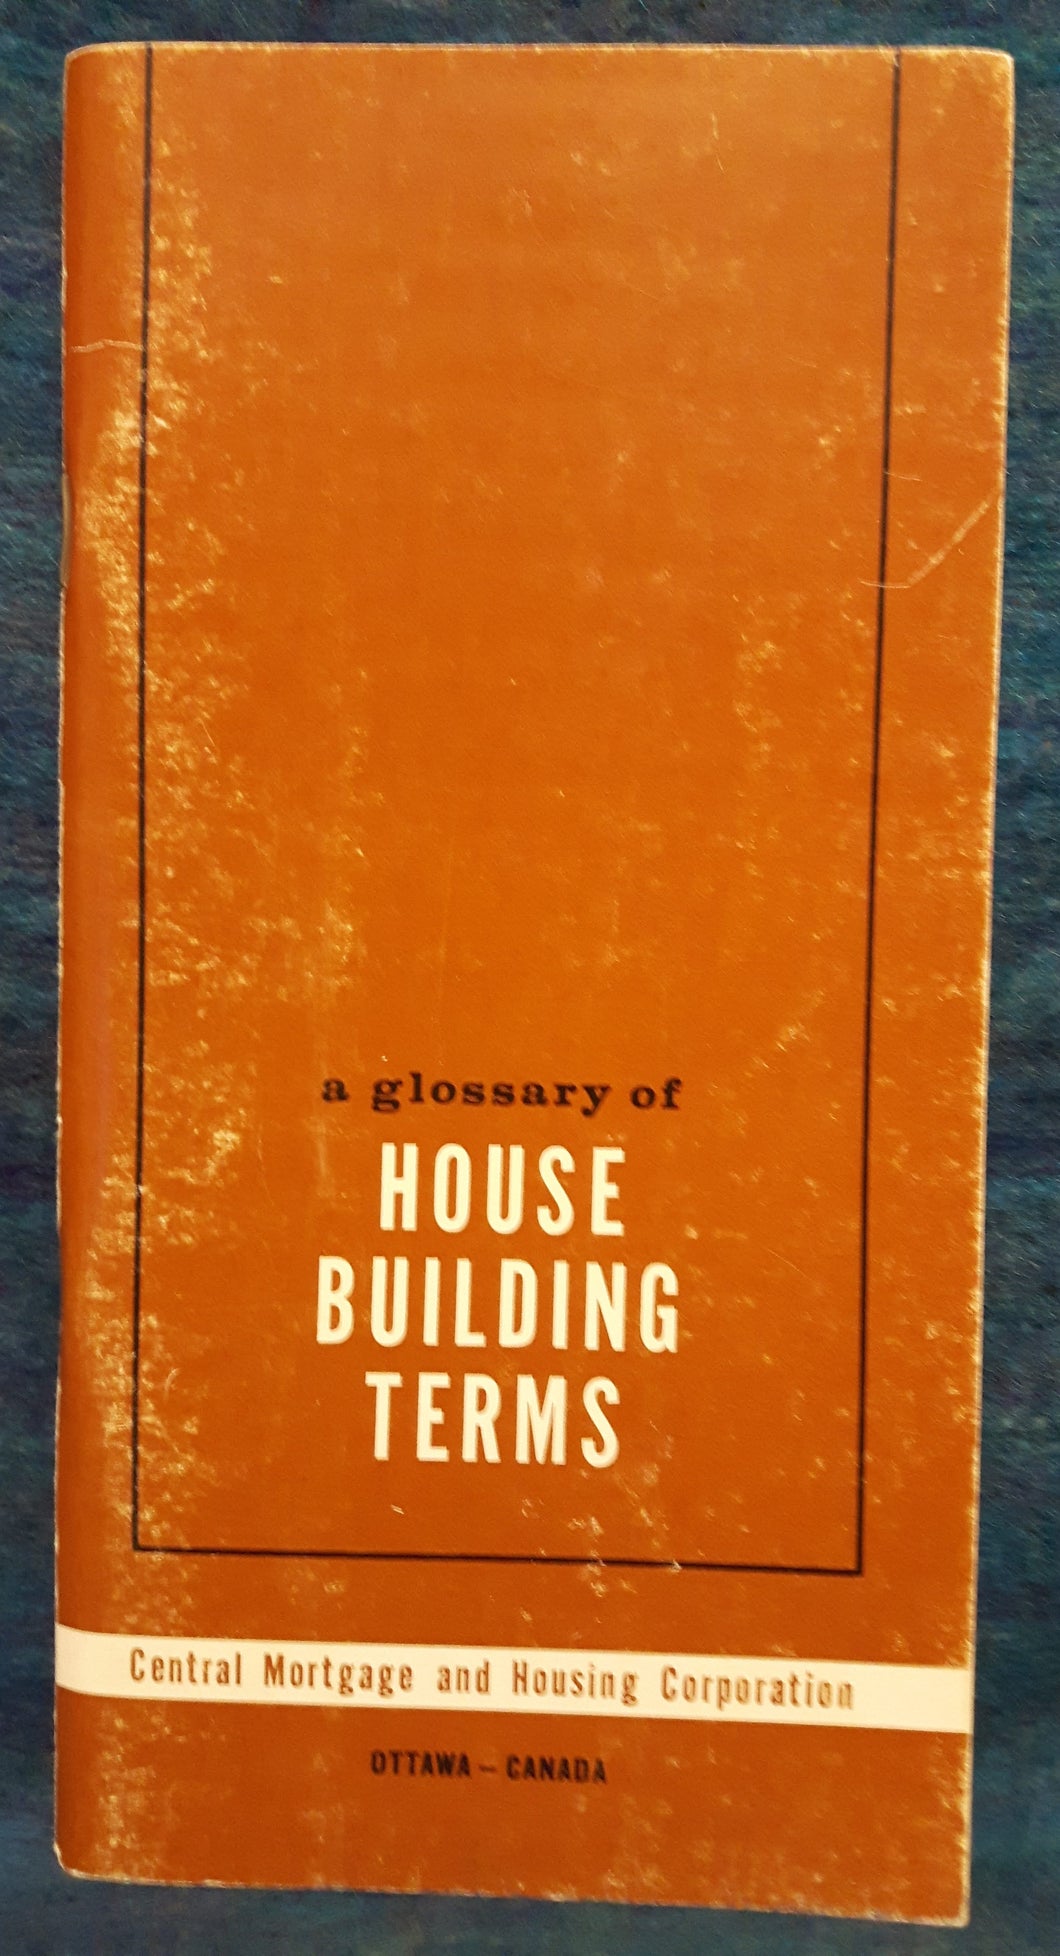 A Glossary of House Building Terms